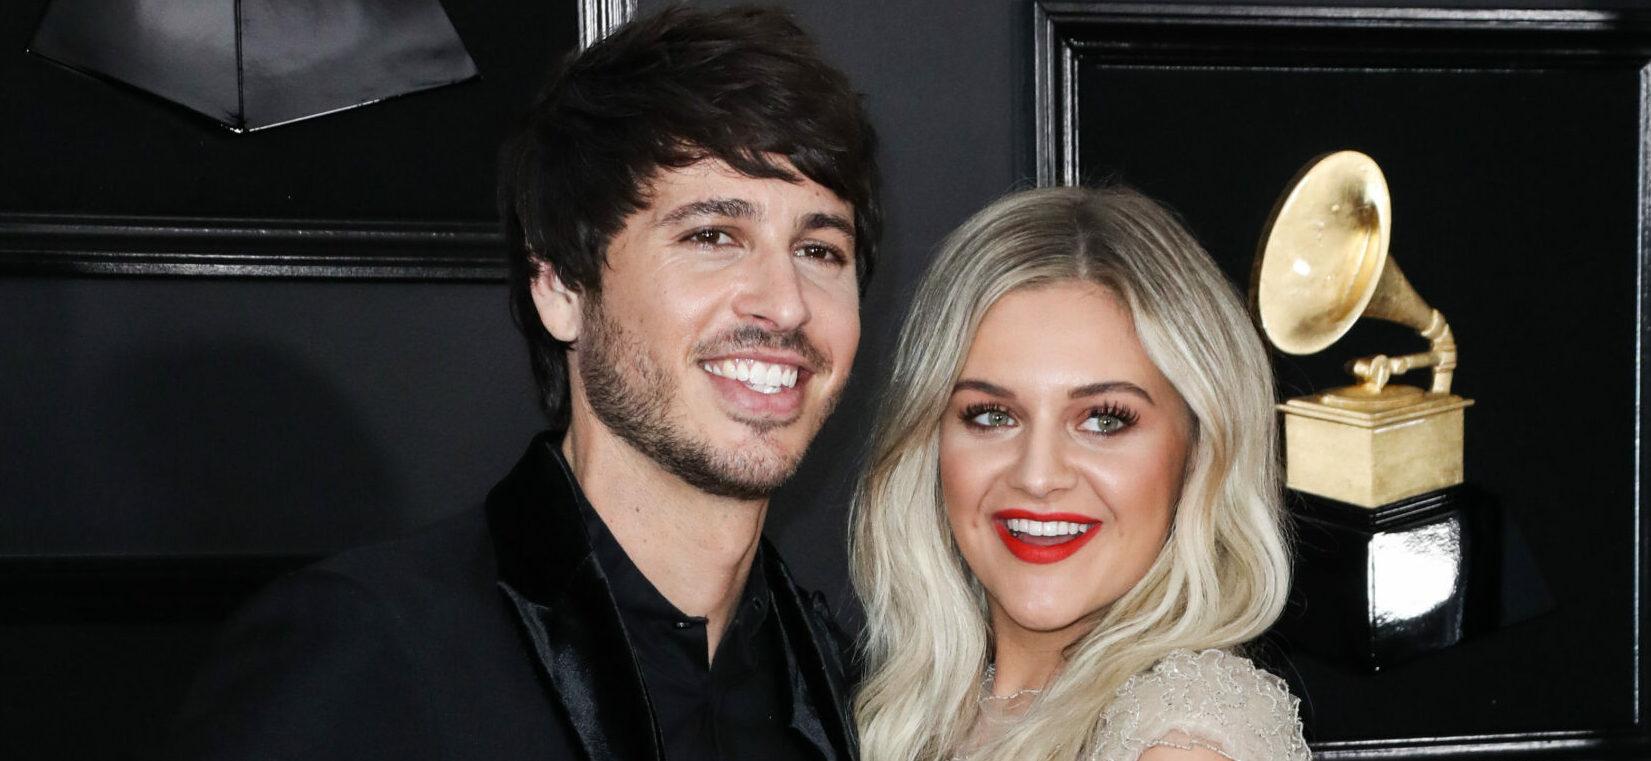 Kelsea Ballerini Allegedly Had An Affair With This Singer During Her Marriage To Morgan Evans